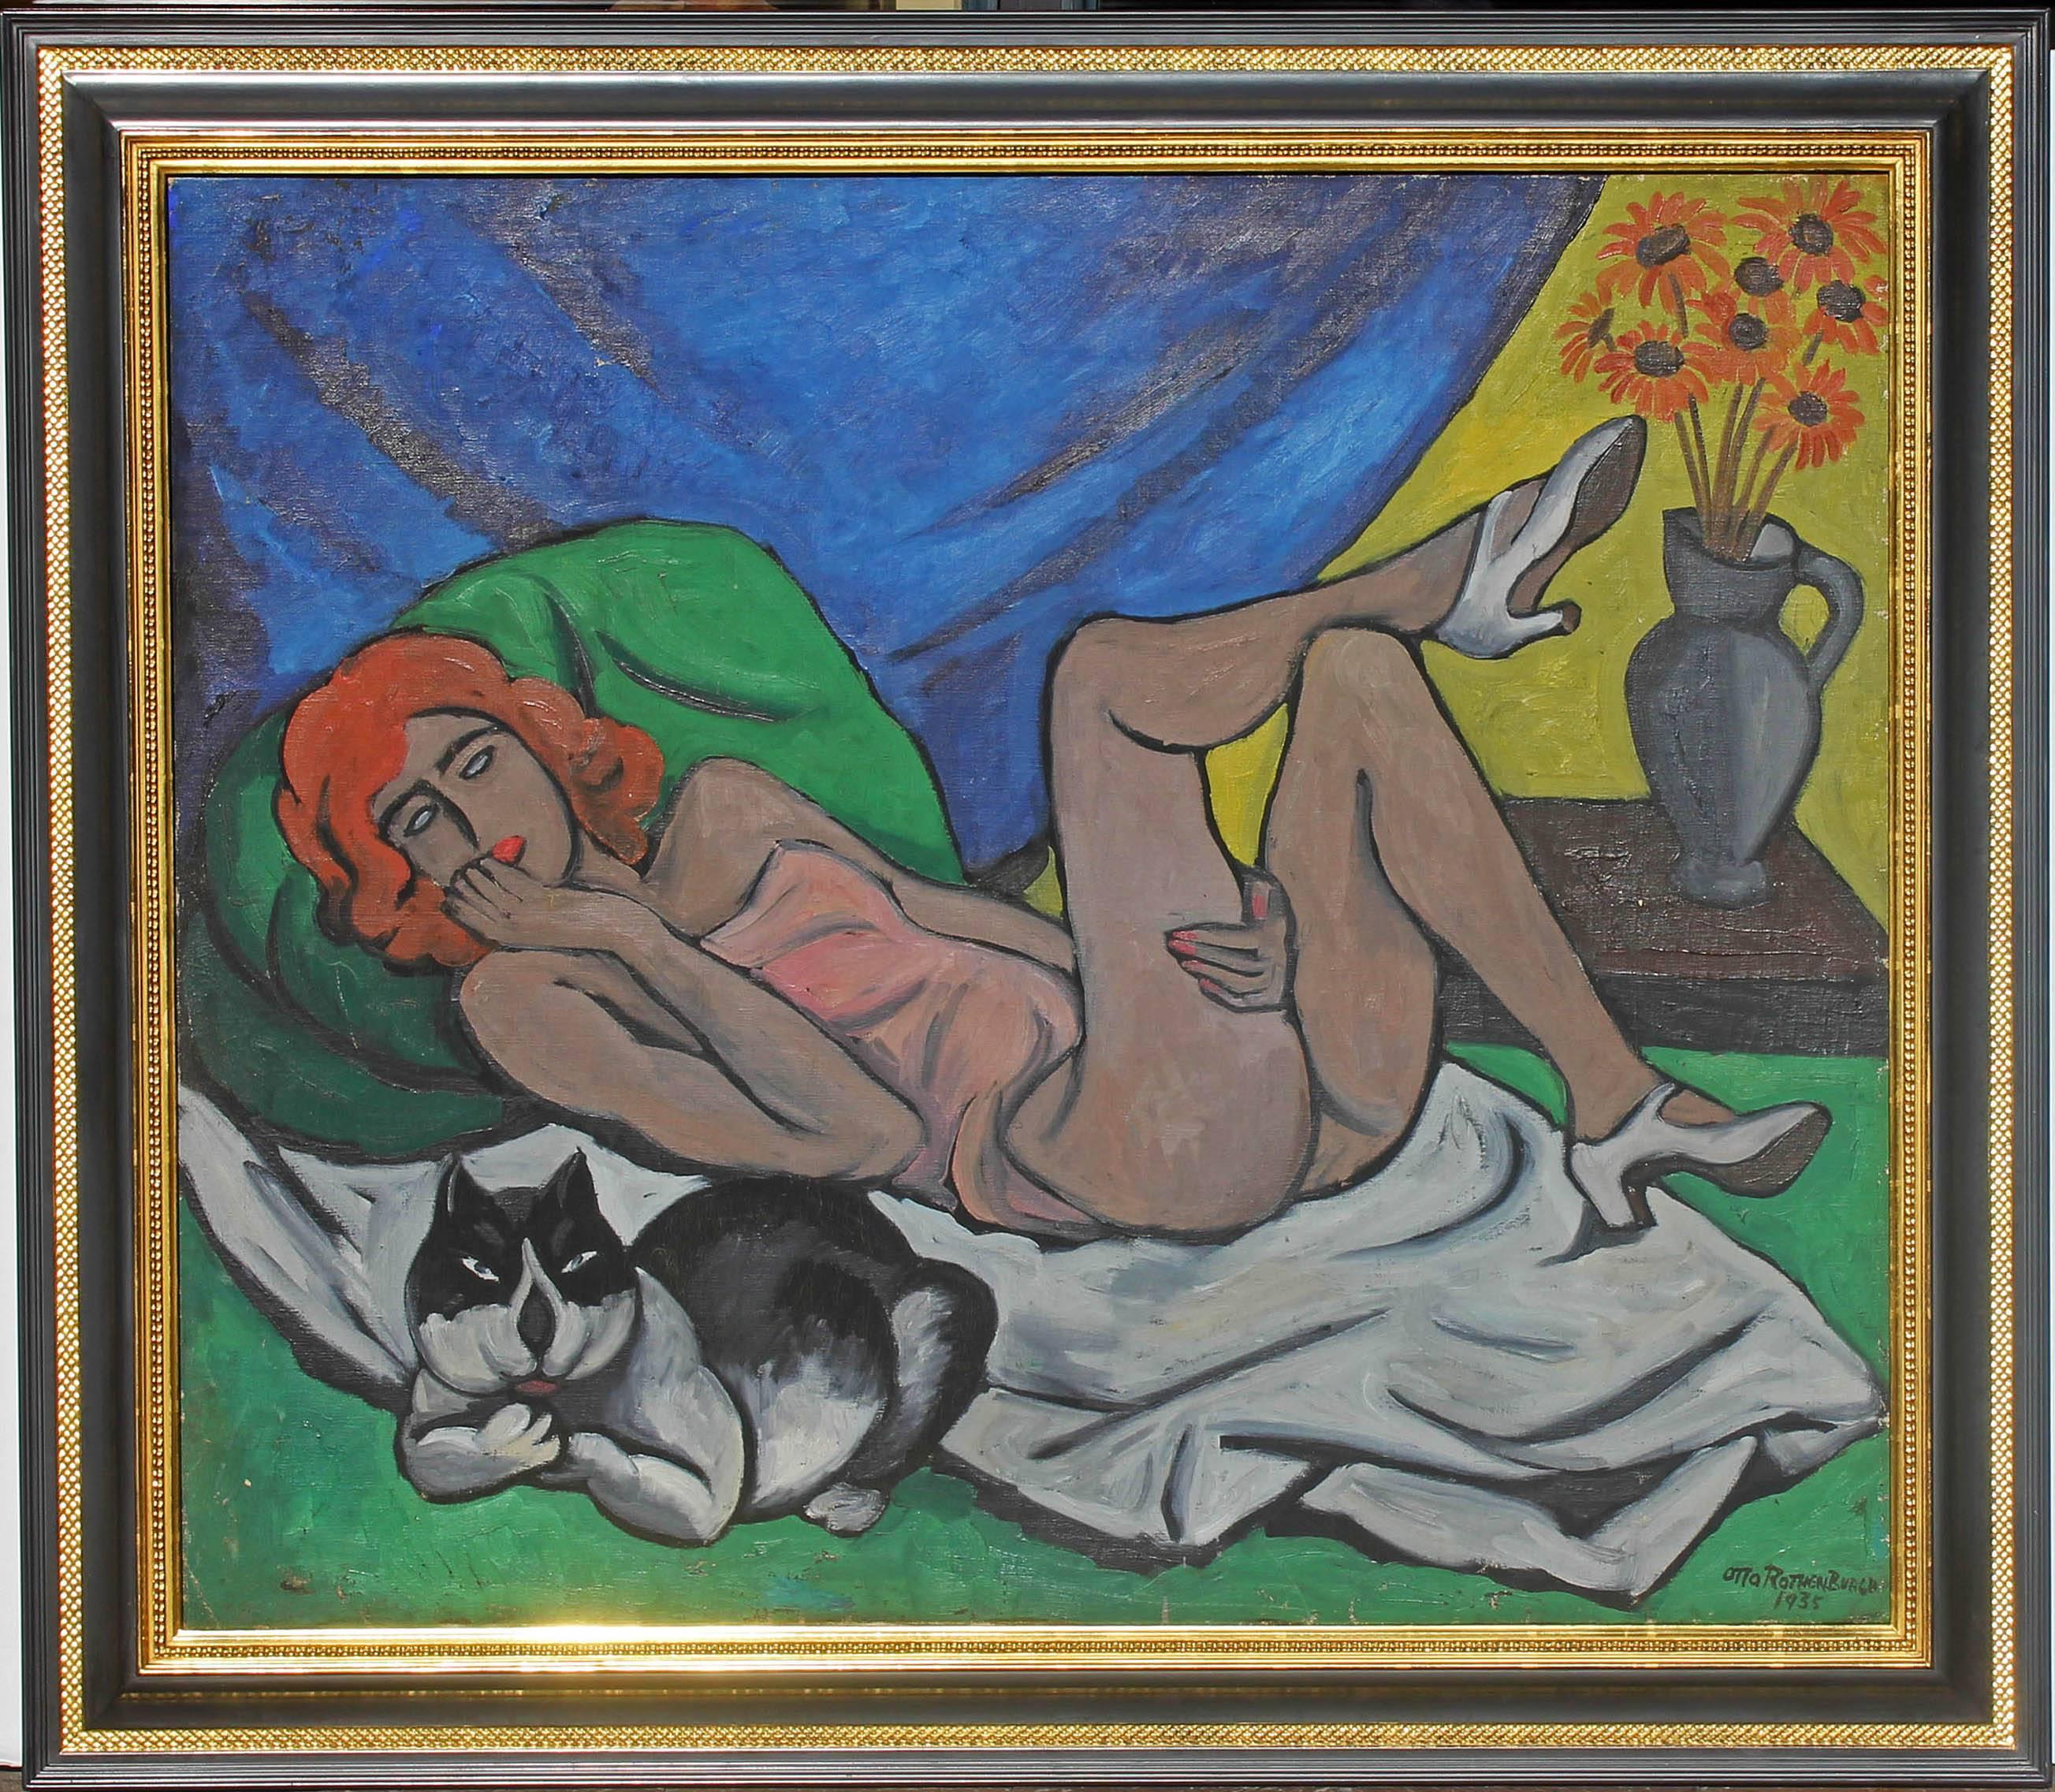 Modernist boudoir oil painting. Portrait of a scantily clad woman with the Cheshire cat. By Otto Rothenburgh. Dated 1935. Oil on canvas. Gilt and ebonized modern frame.
Otto H. Rothenburgh (1893-1992). Rothenburgh was born in Philadelphia, and was